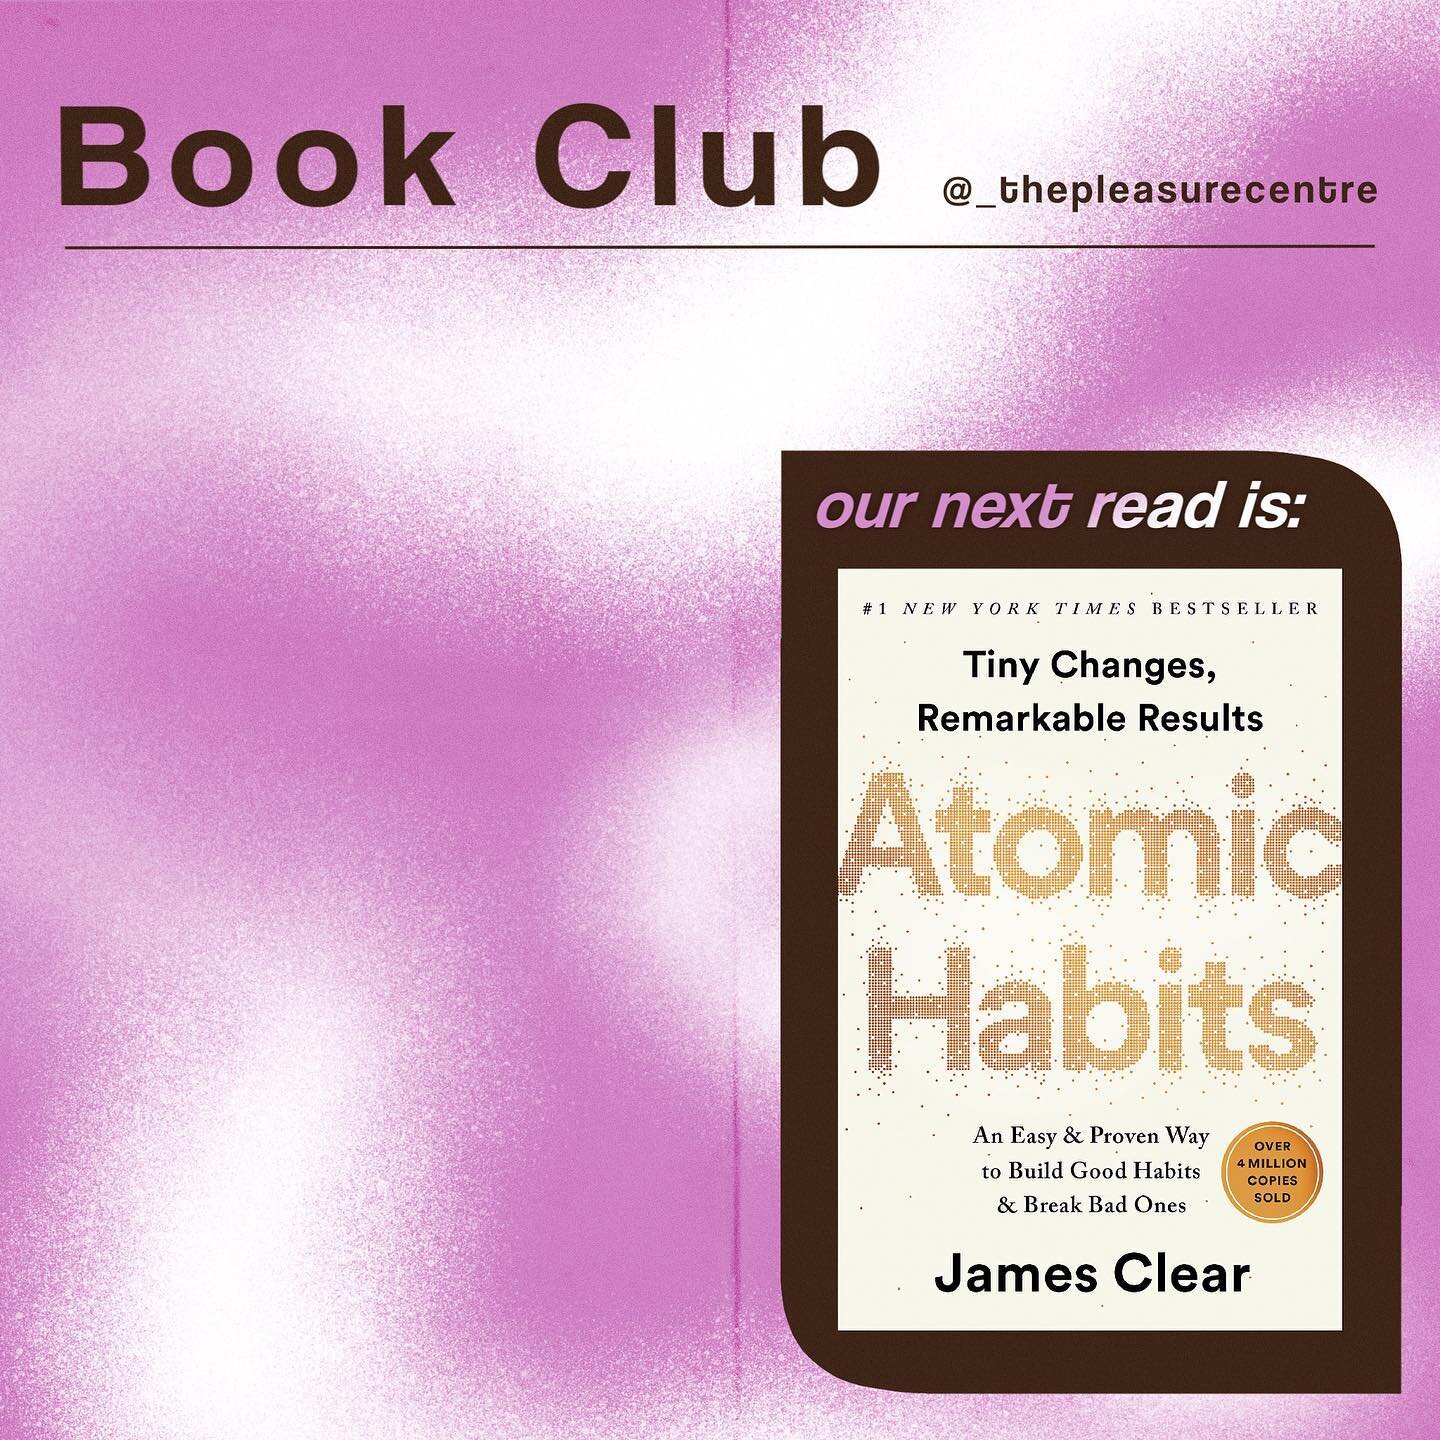 Next months pick for The Pleasure Centre Book Club is 'Atomic Habits' by James Clear. 

The discussion thread will be posted at the end of March! The thread for last months read &lsquo;The Ethical Slut&rsquo; will be up soon for members to share thei